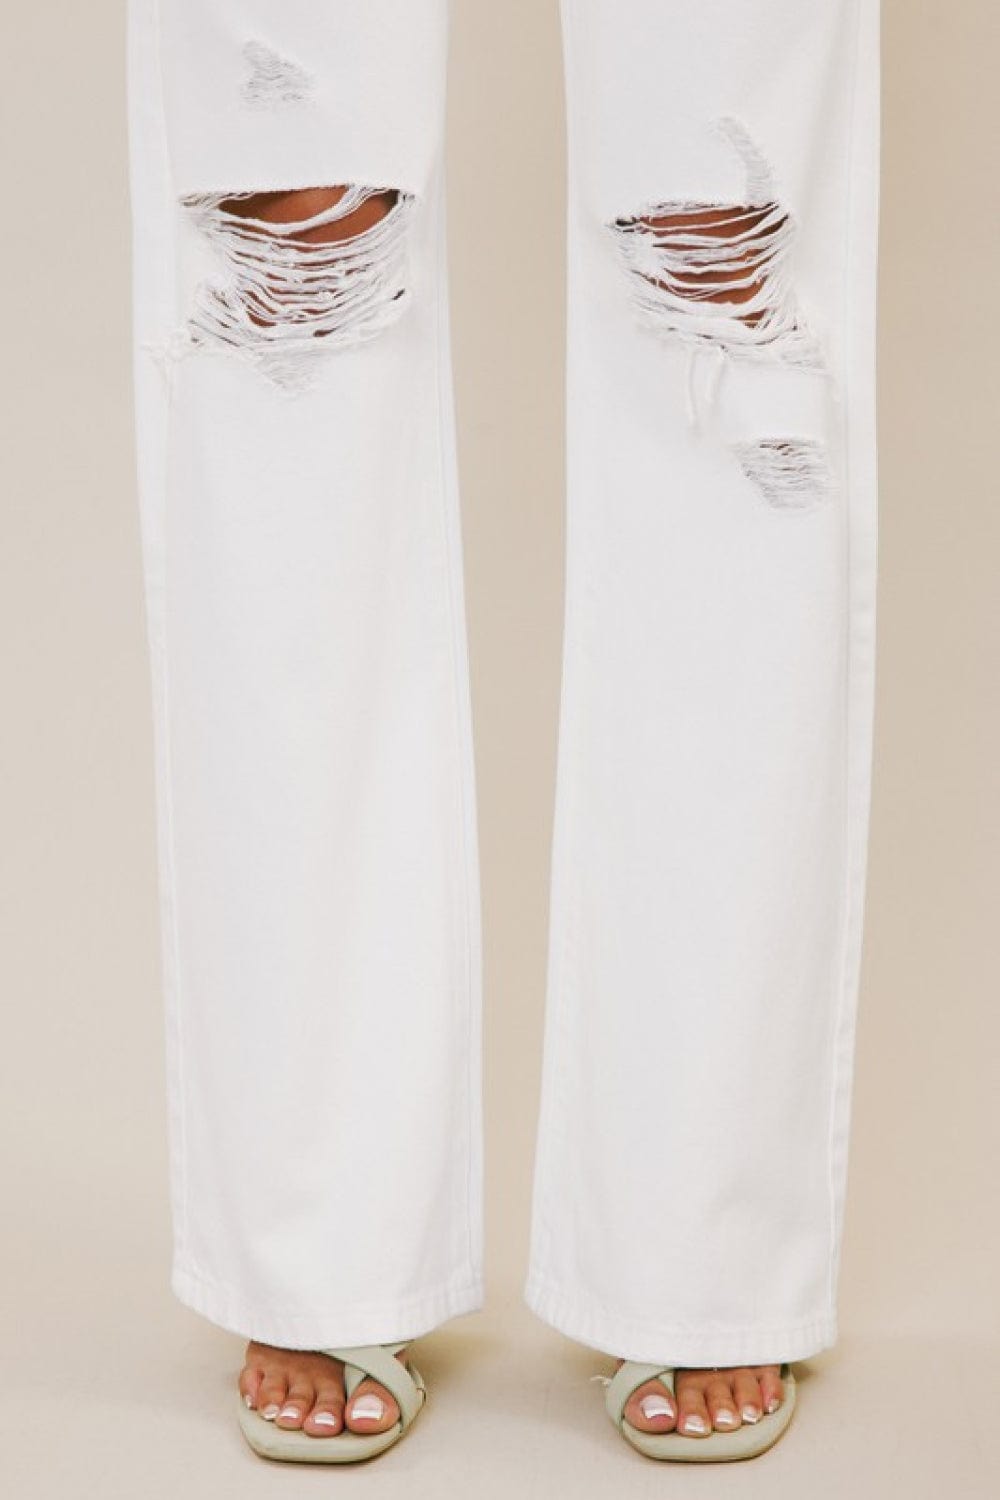 Kancan High-Rise Distressed Flare Jeans in White (Button-Fly)